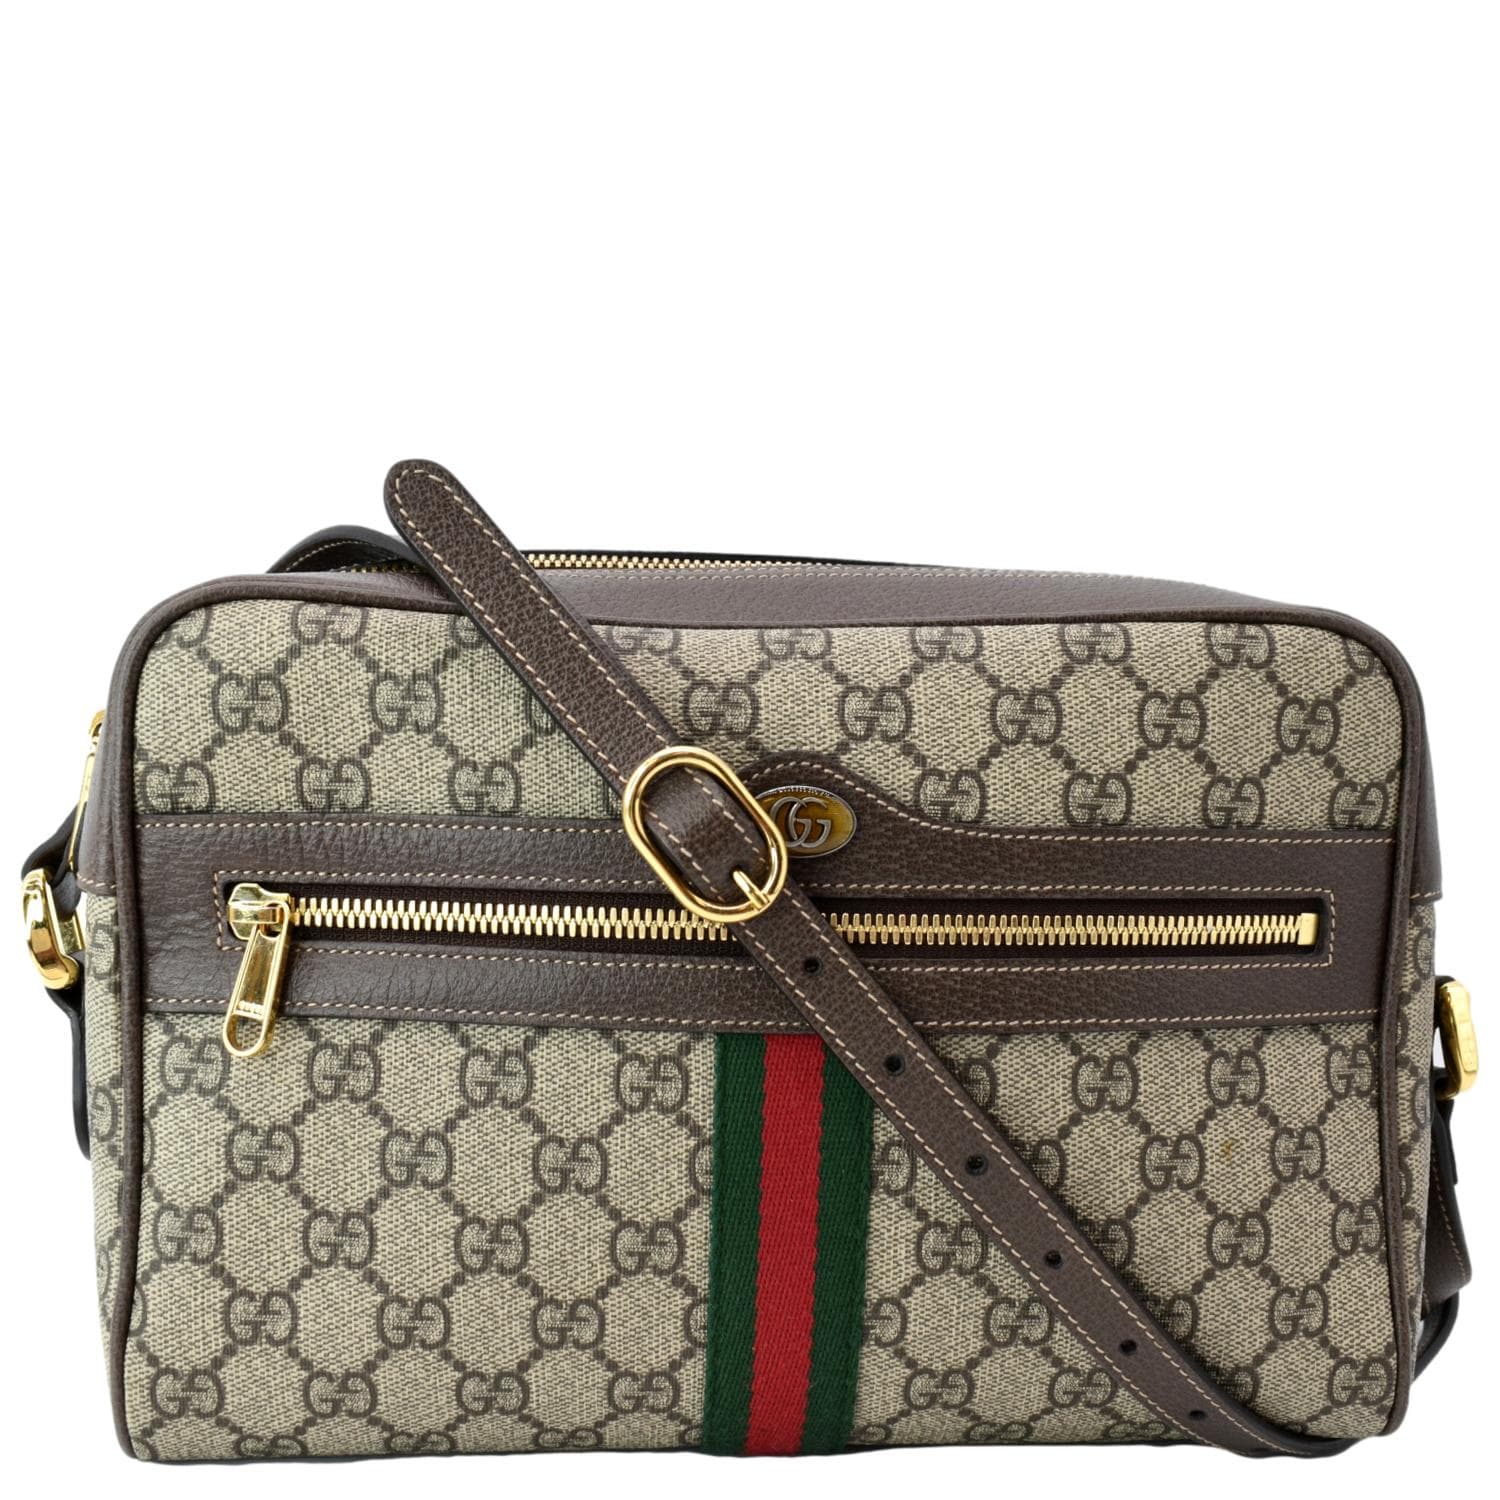 Ophidia GG Small Shoulder Bag in Beige - Gucci